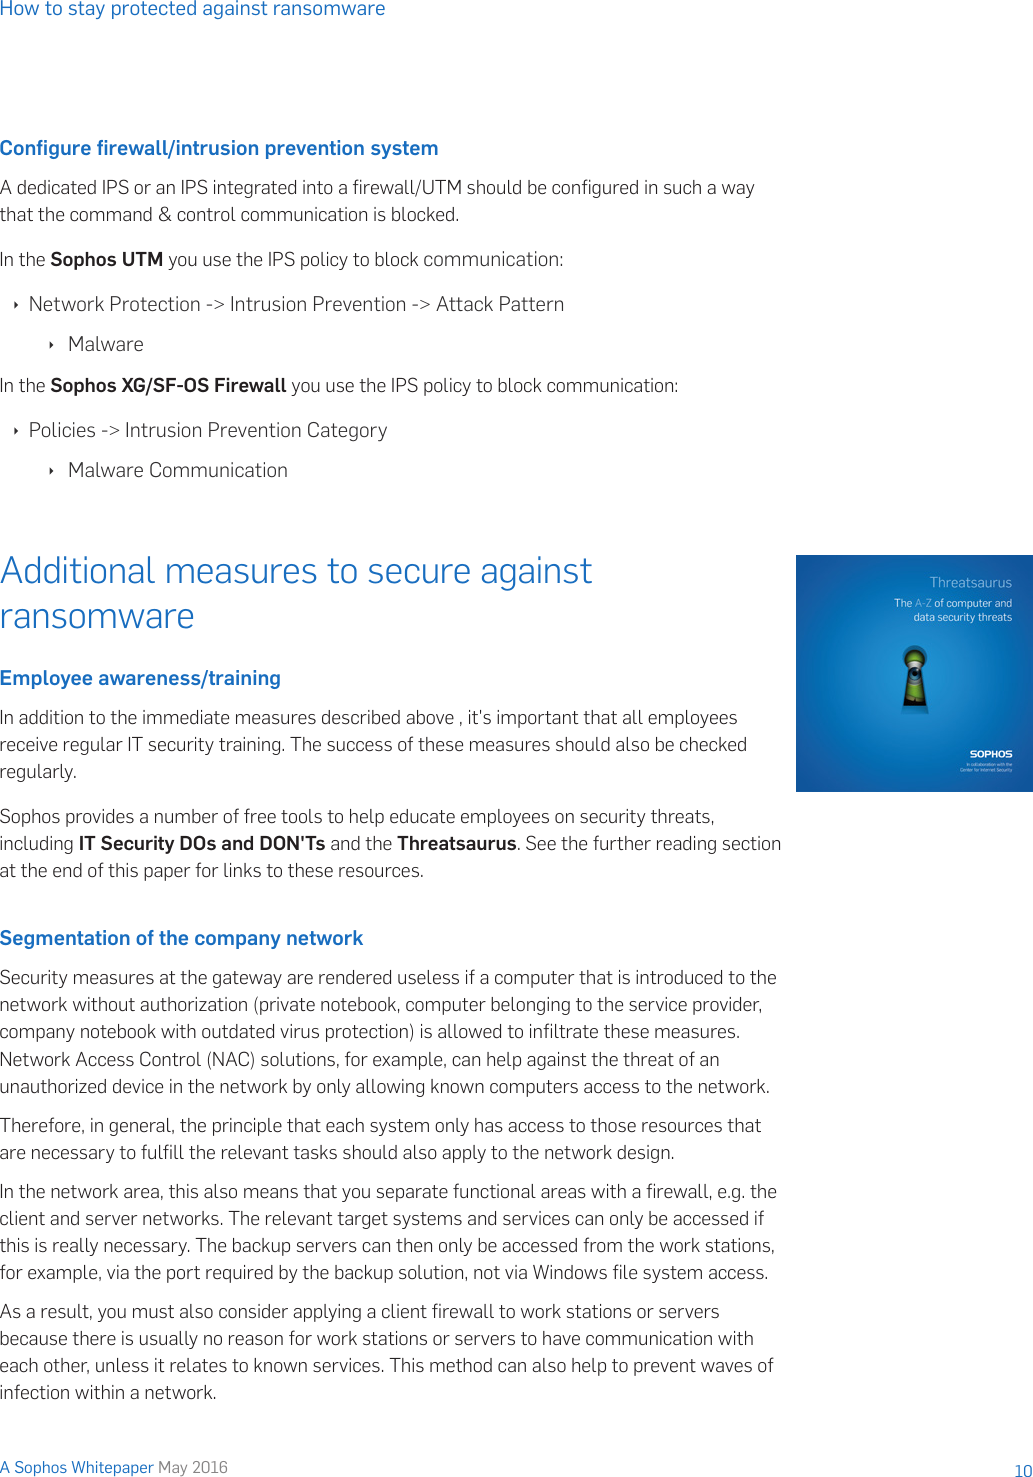 Page 10 of 12 - Sophos-ransomware-protection